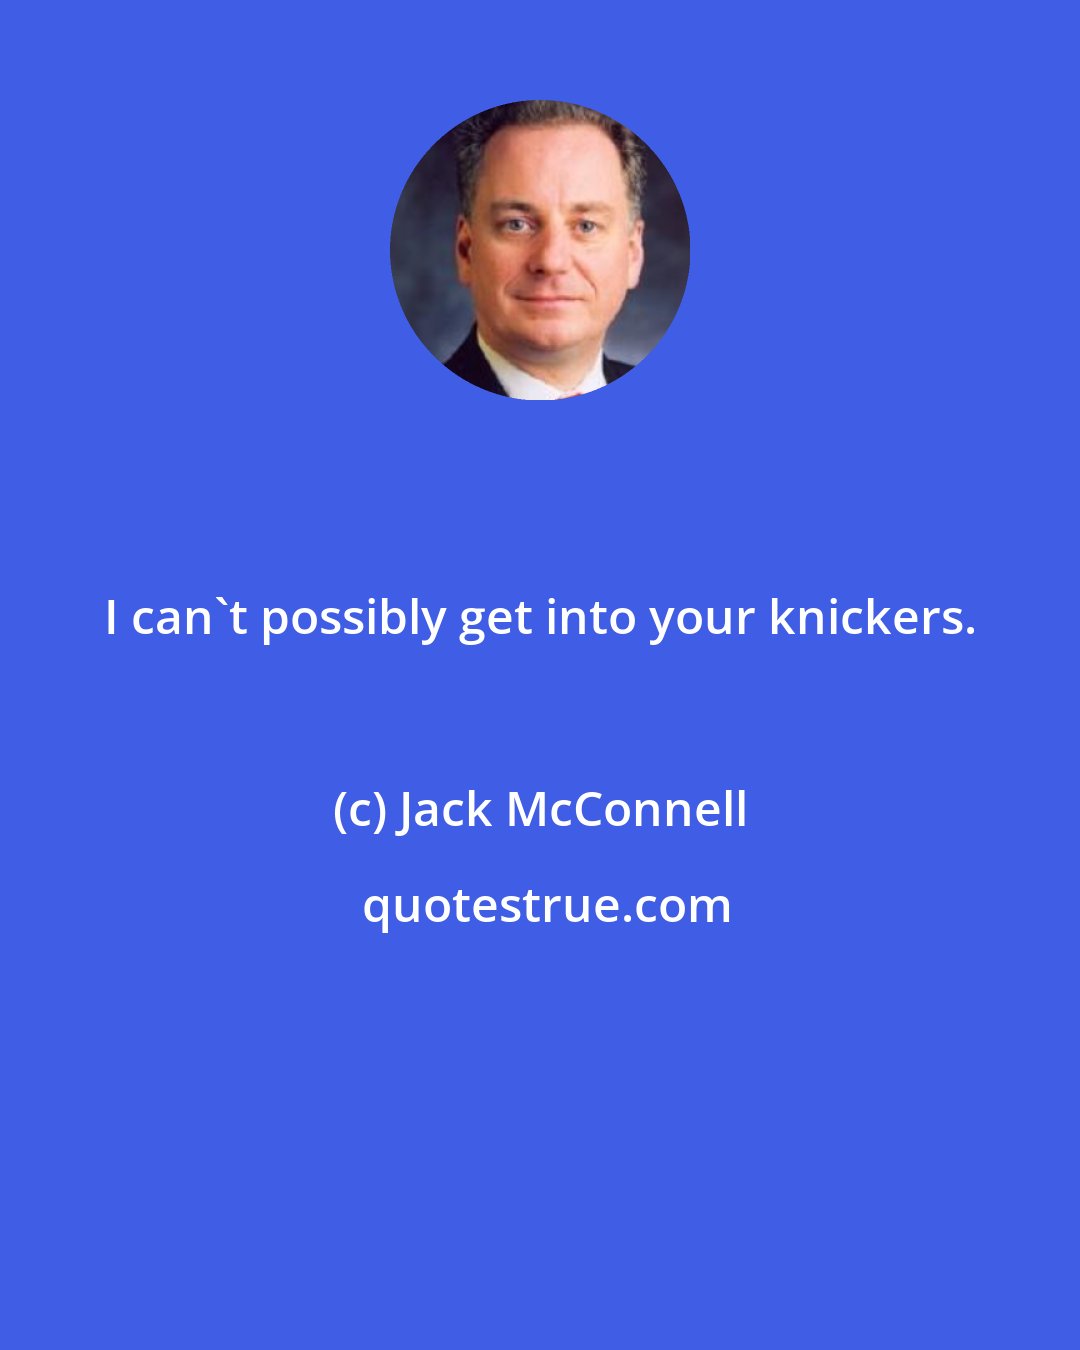 Jack McConnell: I can't possibly get into your knickers.